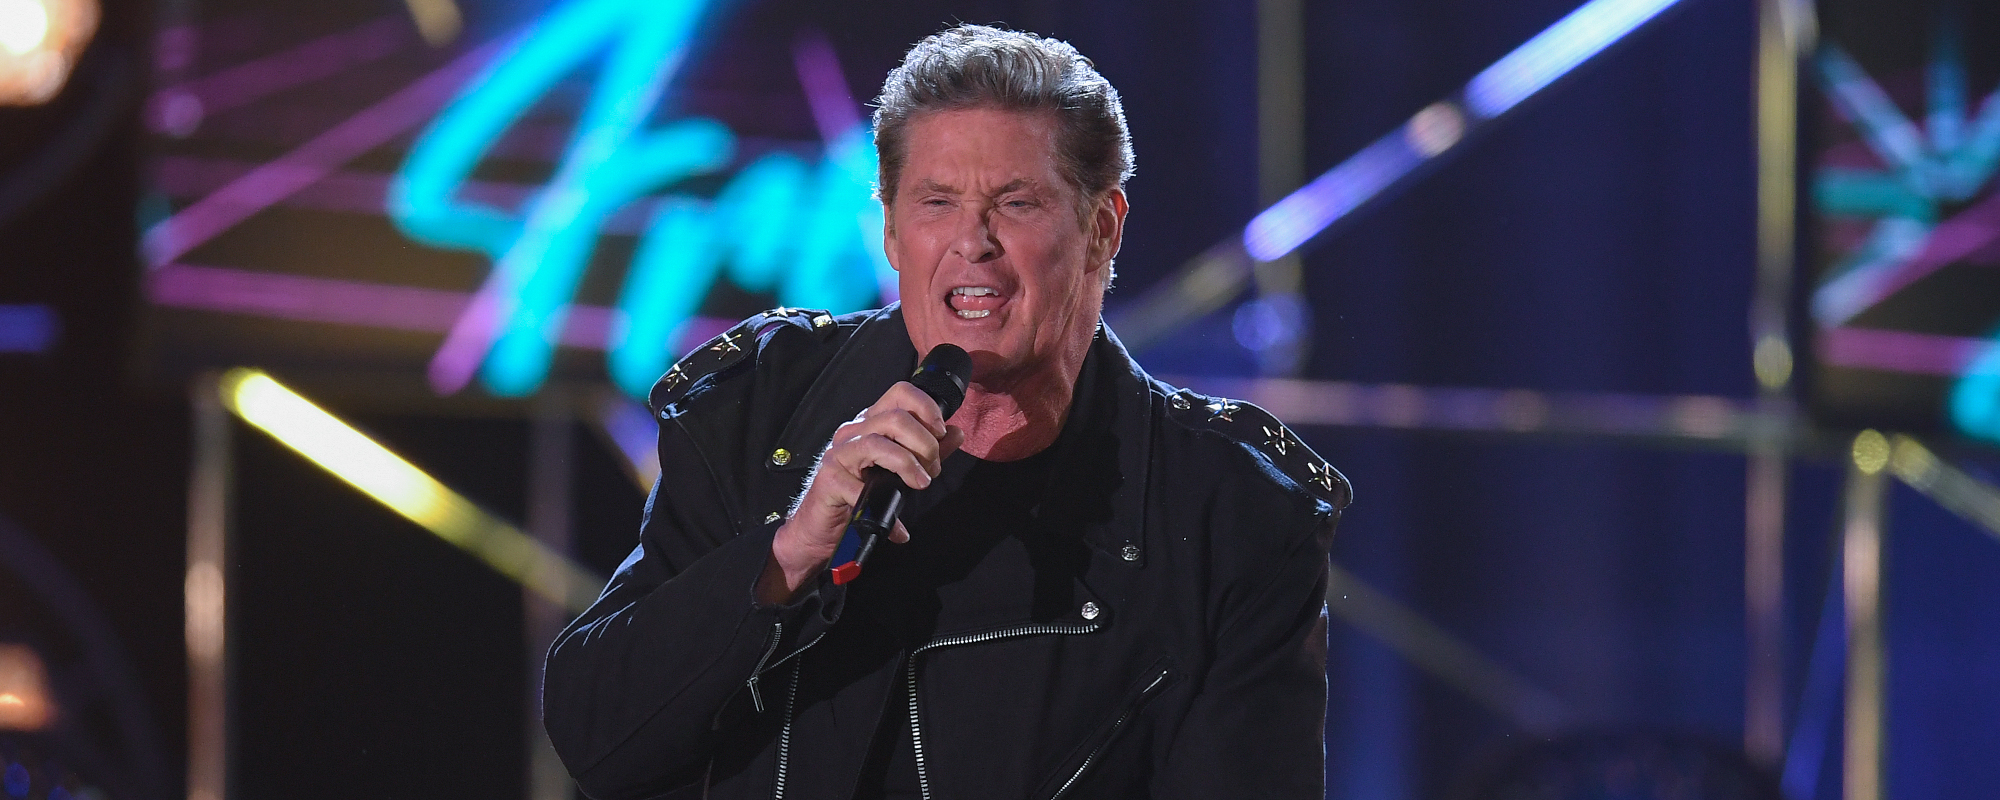 Remember When: David Hasselhoff Plays a Part in Bringing Down The Berlin Wall